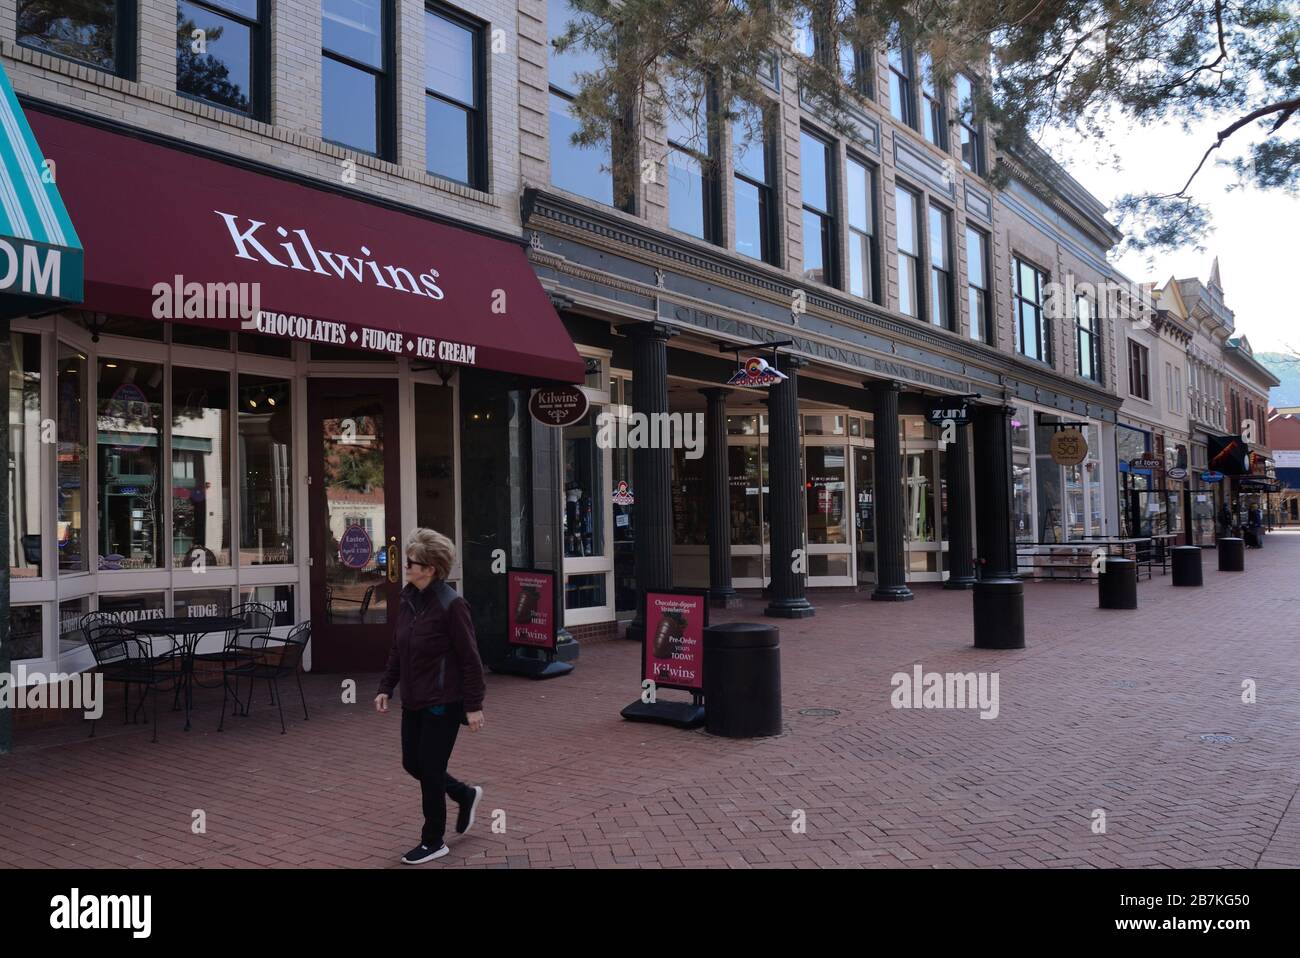 On a sunny March Monday with afternoon temperatures above 50 degrees, Downtown Boulder would be buzzing with activity. March 16, 2020 was different. Stock Photo